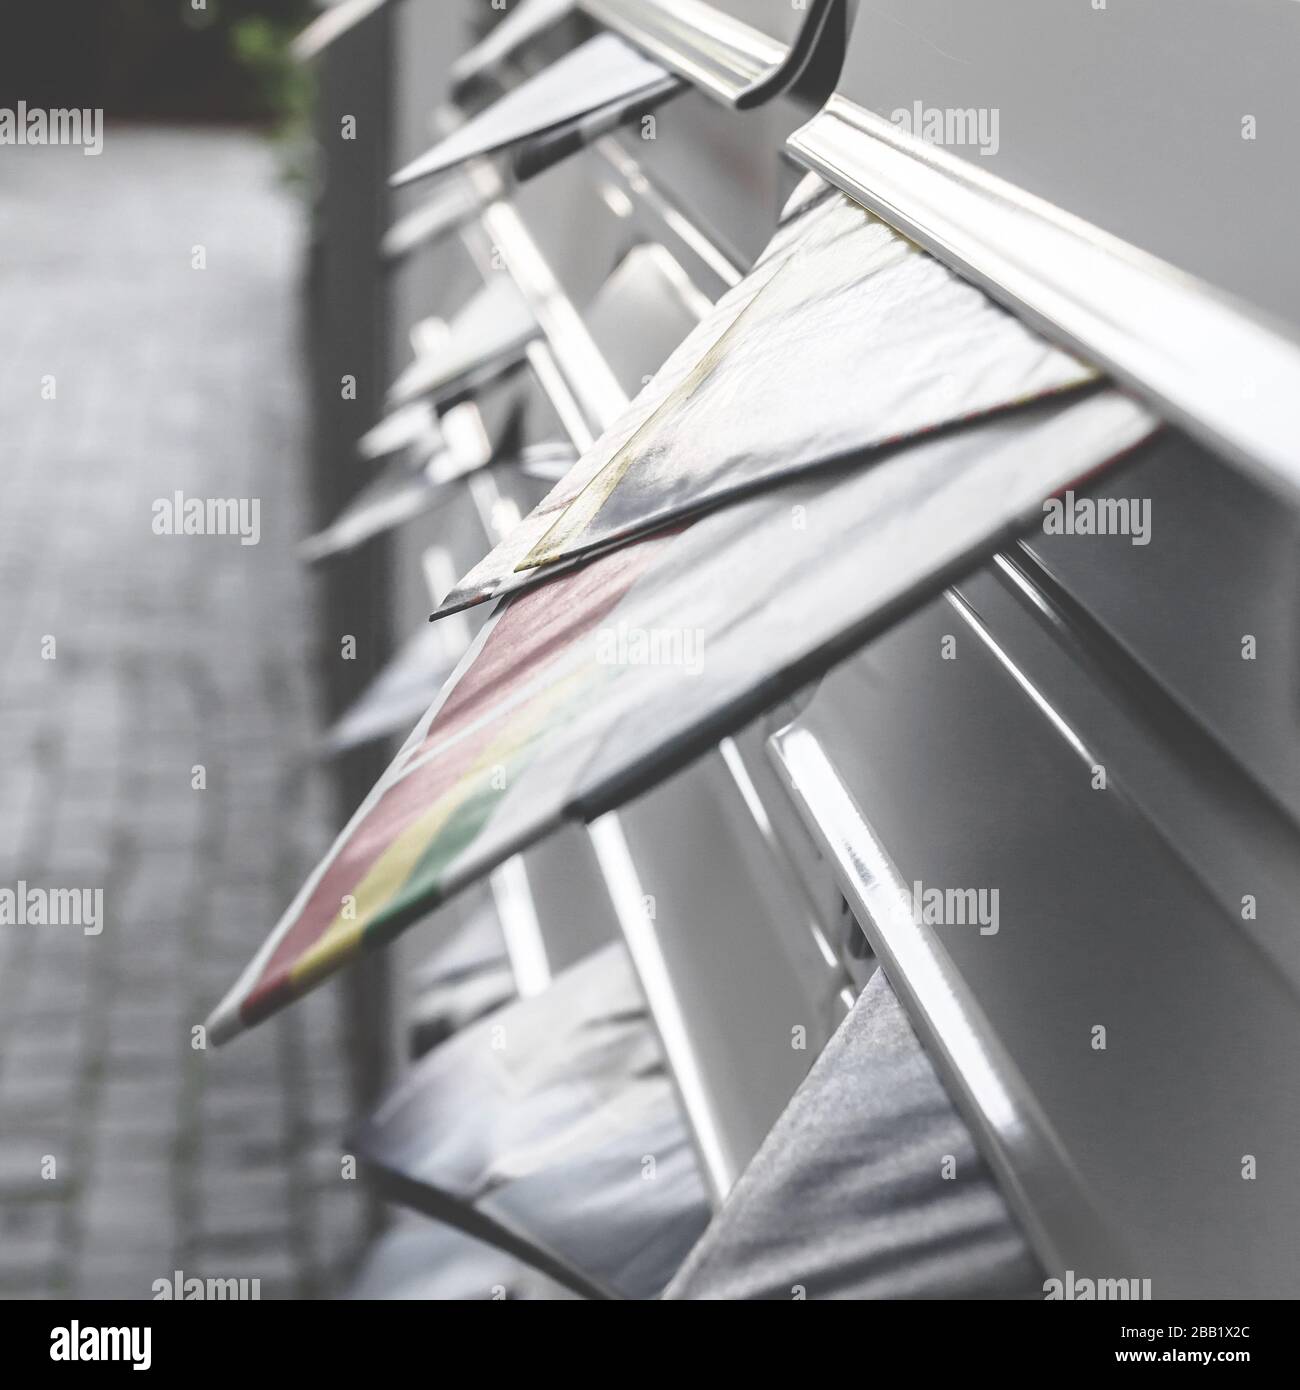 Filled letterboxes. Modern mailboxes filled of leaflets. Business and advertising concepts. Shallow depth of field. Stock Photo